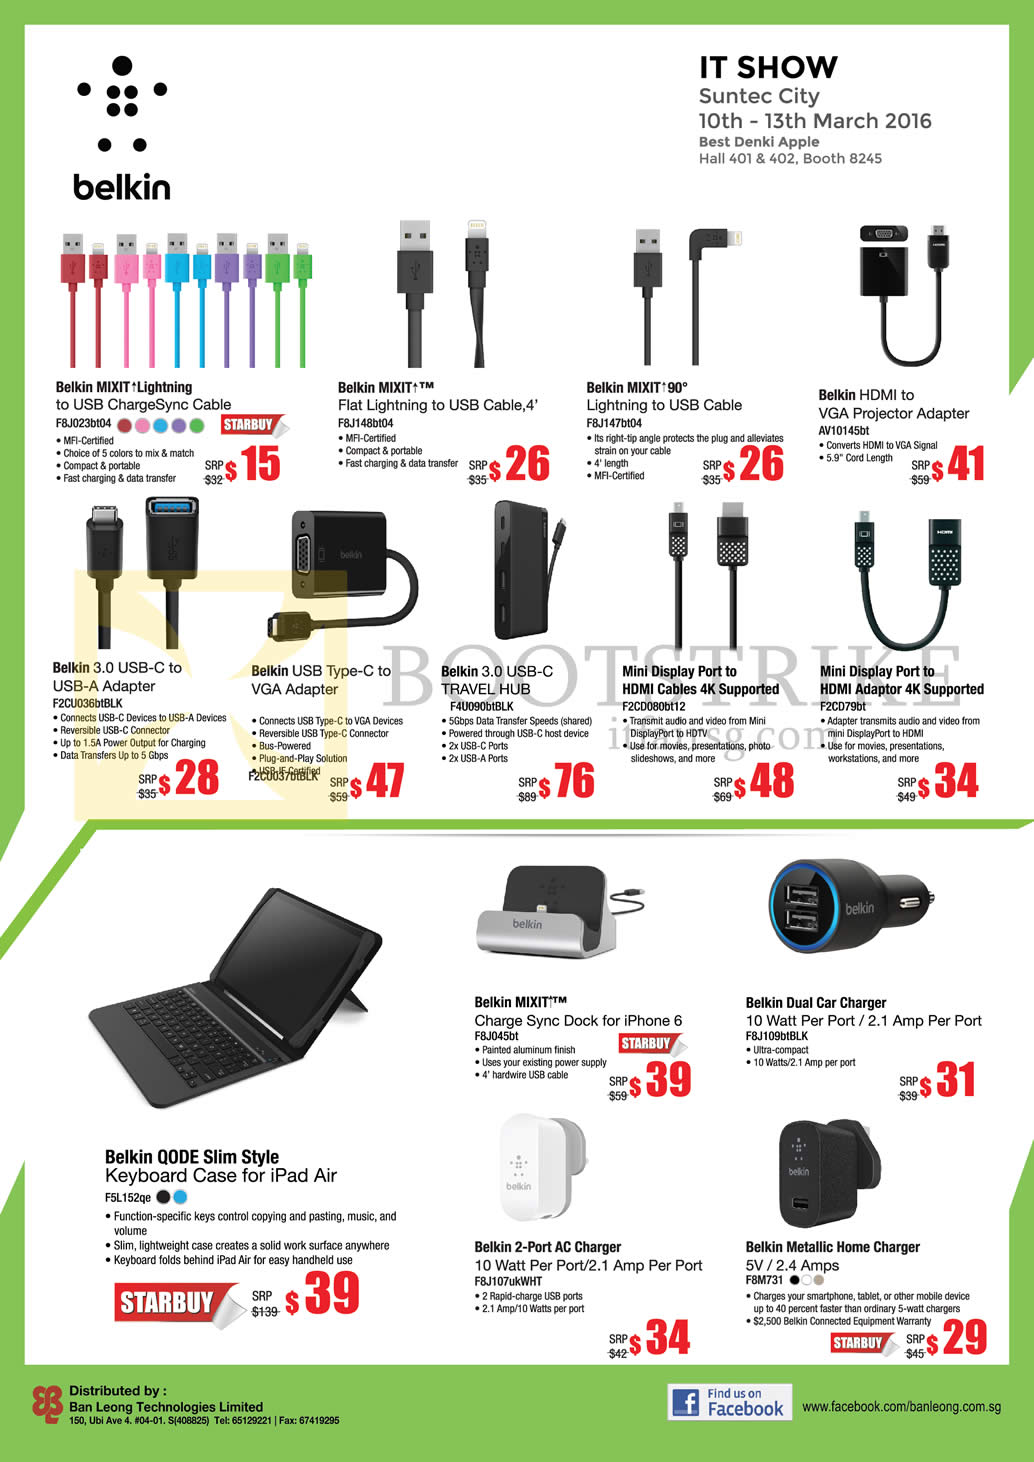 IT SHOW 2016 price list image brochure of Best Denki Belkin Lightning Cables, Keyboard Case, AC Charger, Car Charger, Home Charger, Belkin Mixit, 90, QODE